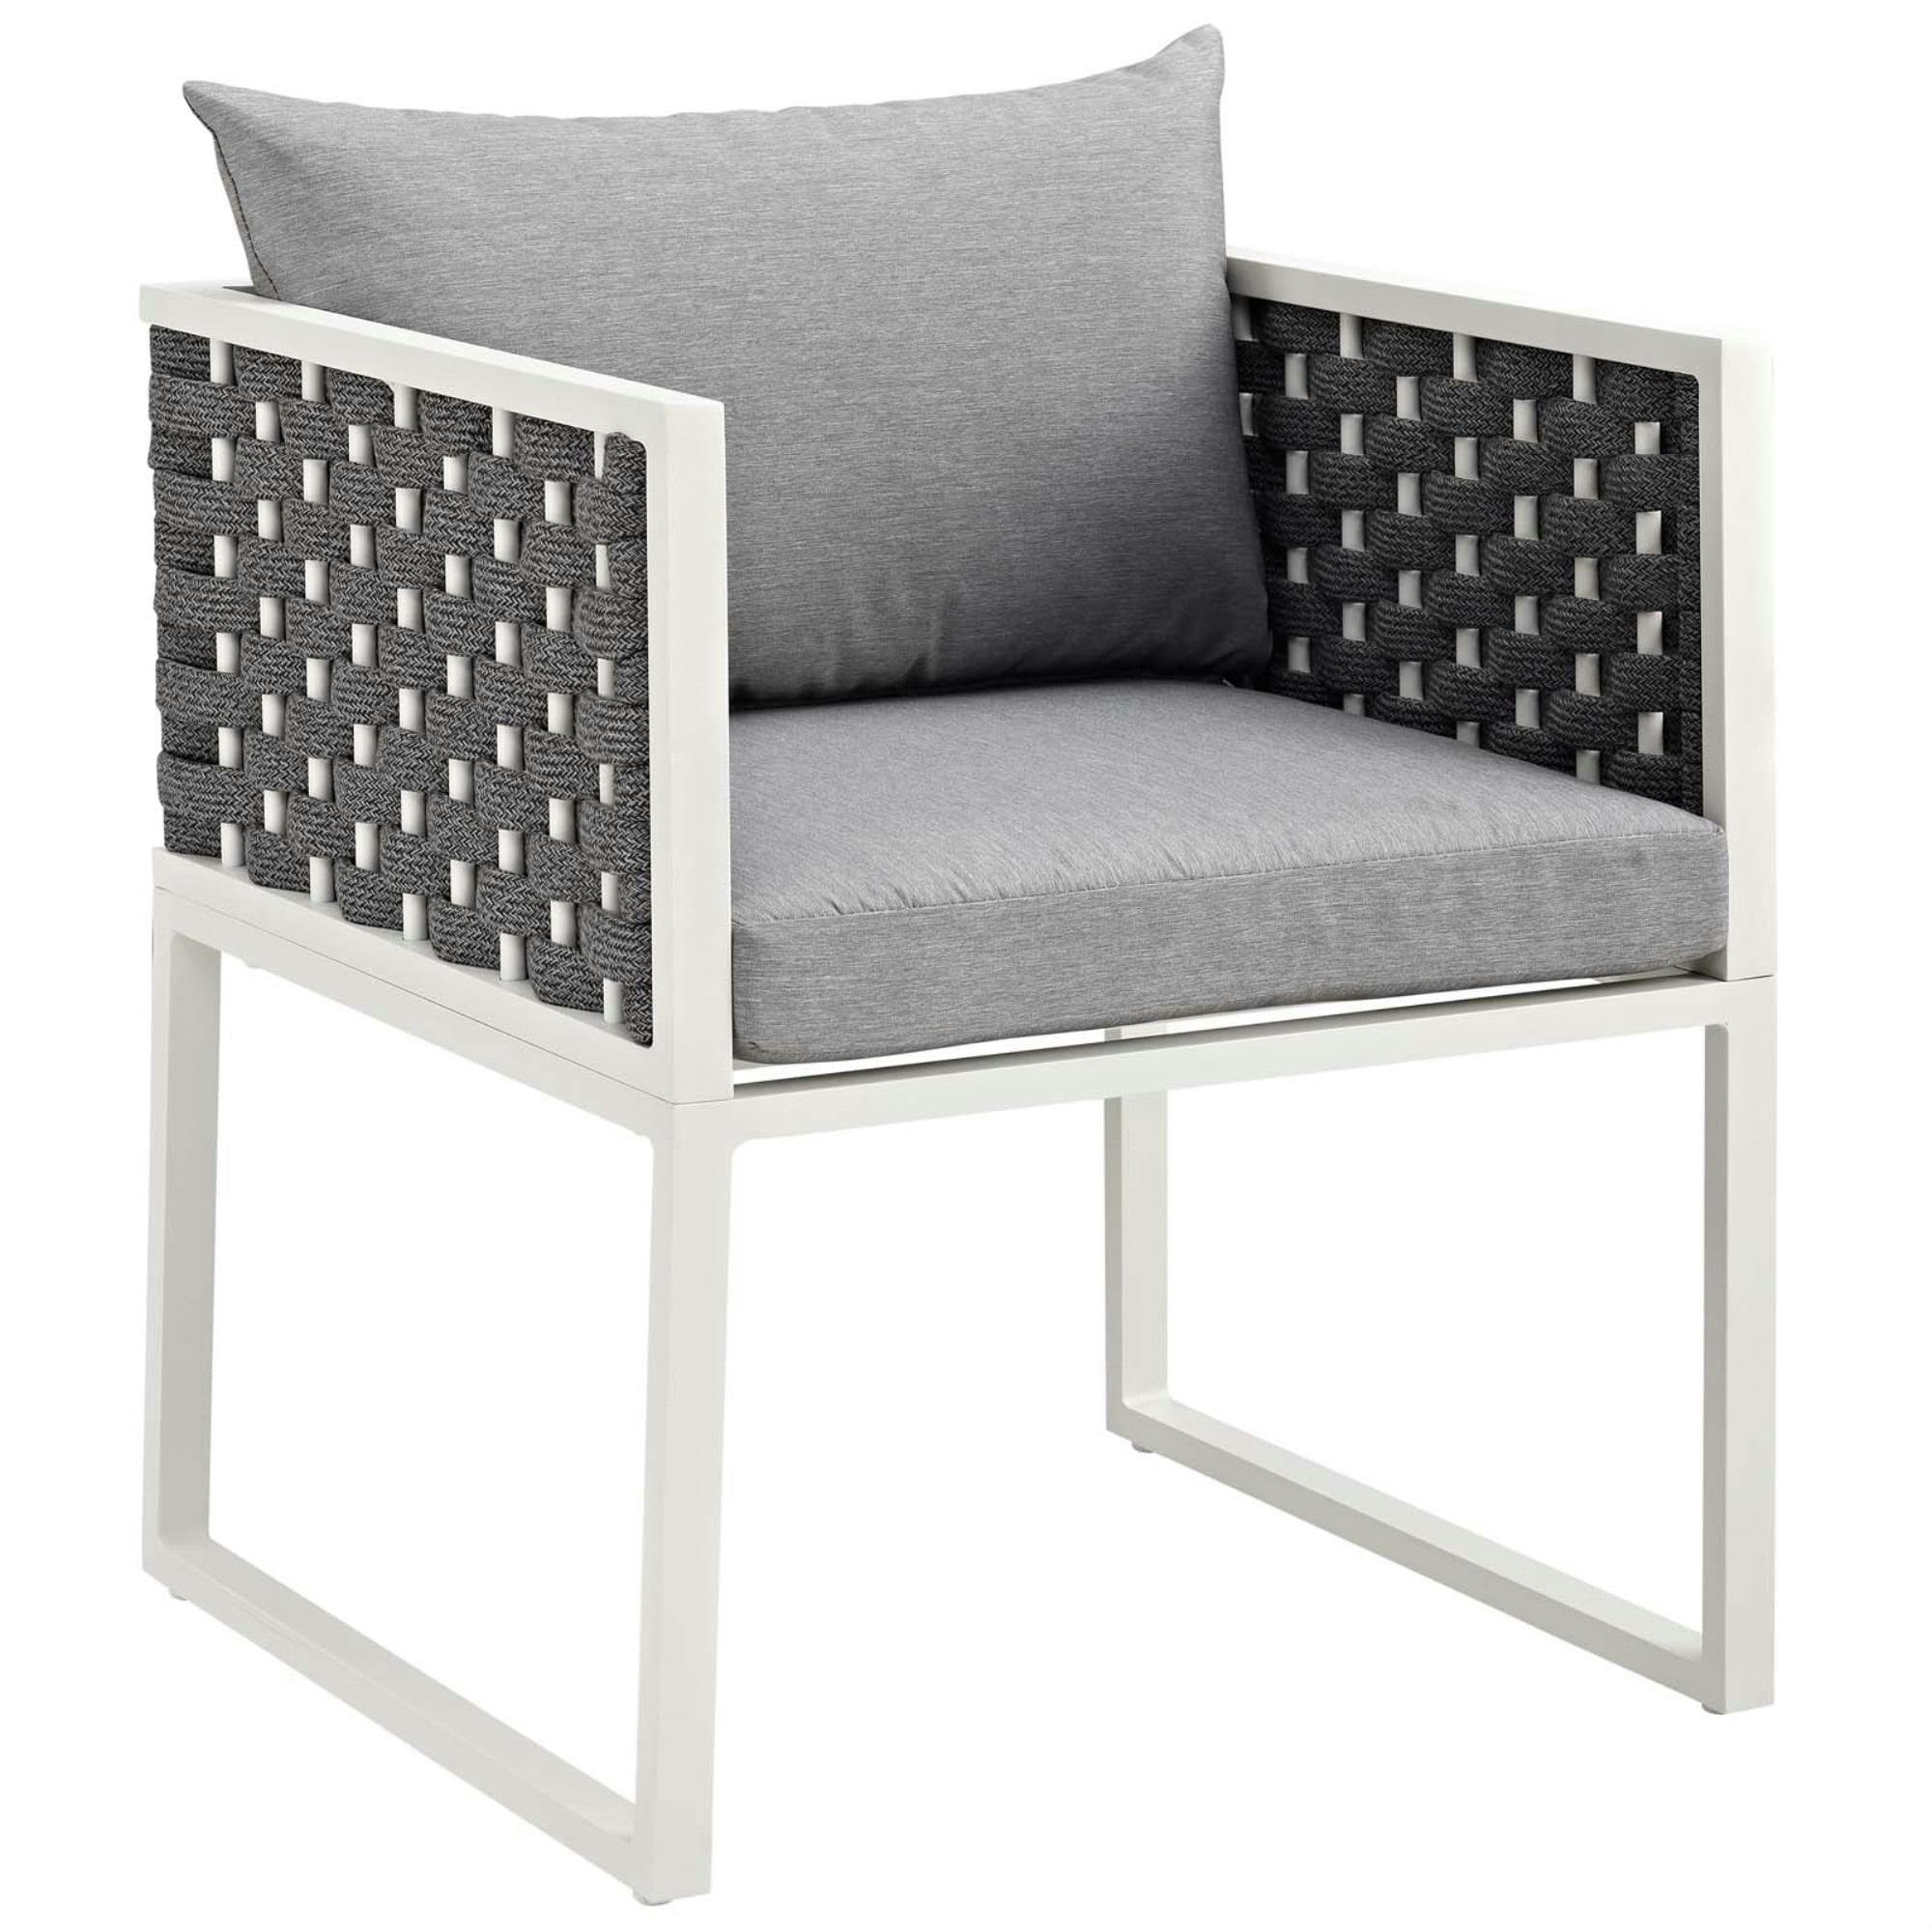 Sylvie Modern White & Gray Aluminum Outdoor Dining Chair with Cushions